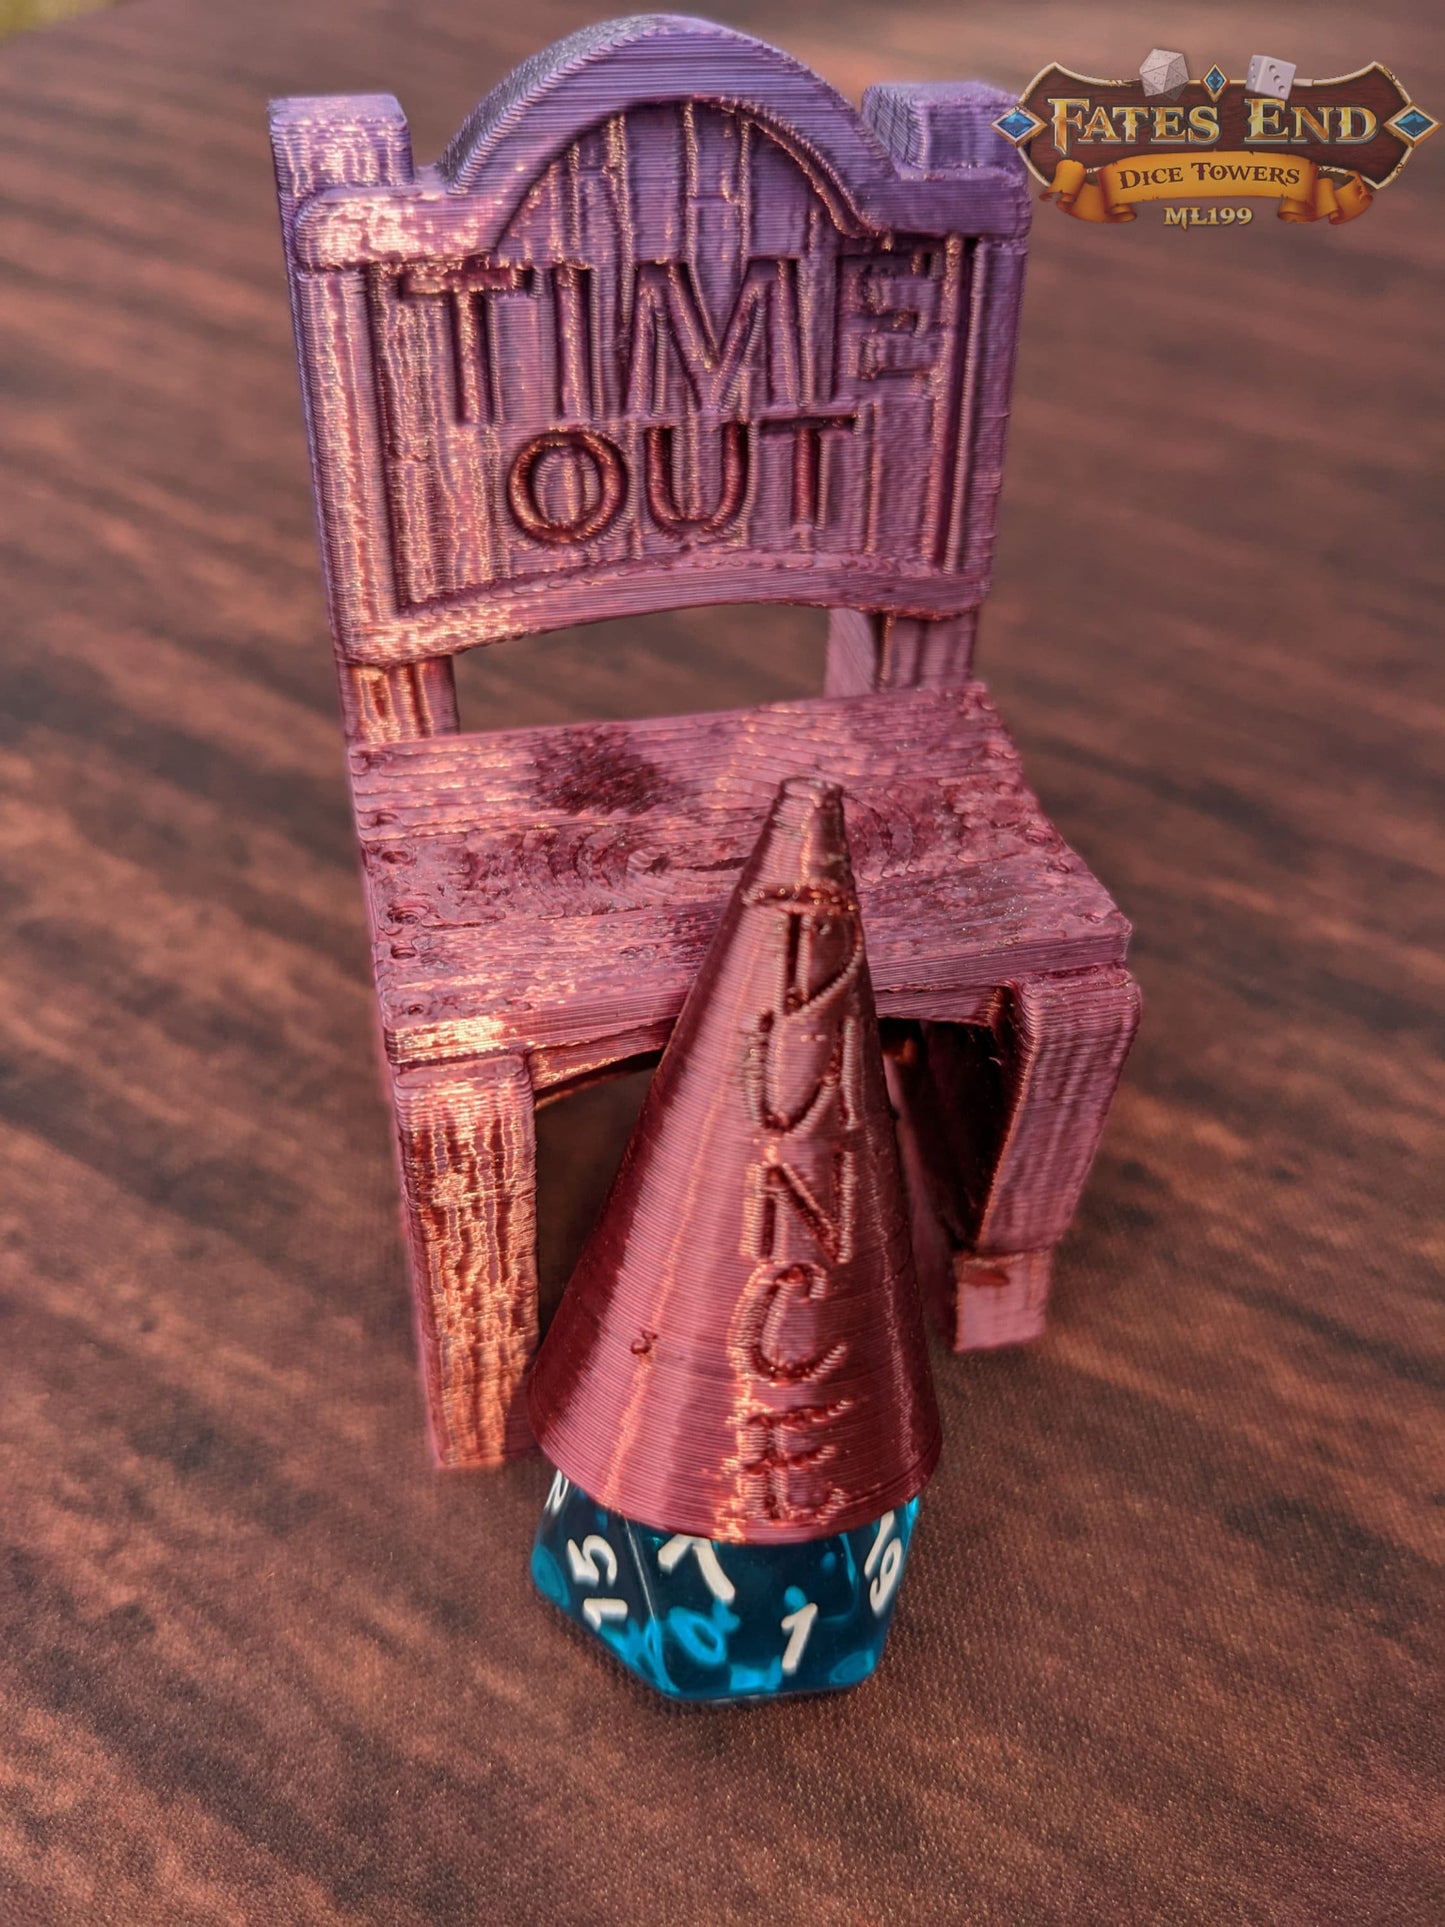 Time Out Chair & Dunce Cap 3D Printed Dice Jail - RPG Dice Vault - D20 Shame Chair - Roll for Redemption and Shameless Fun